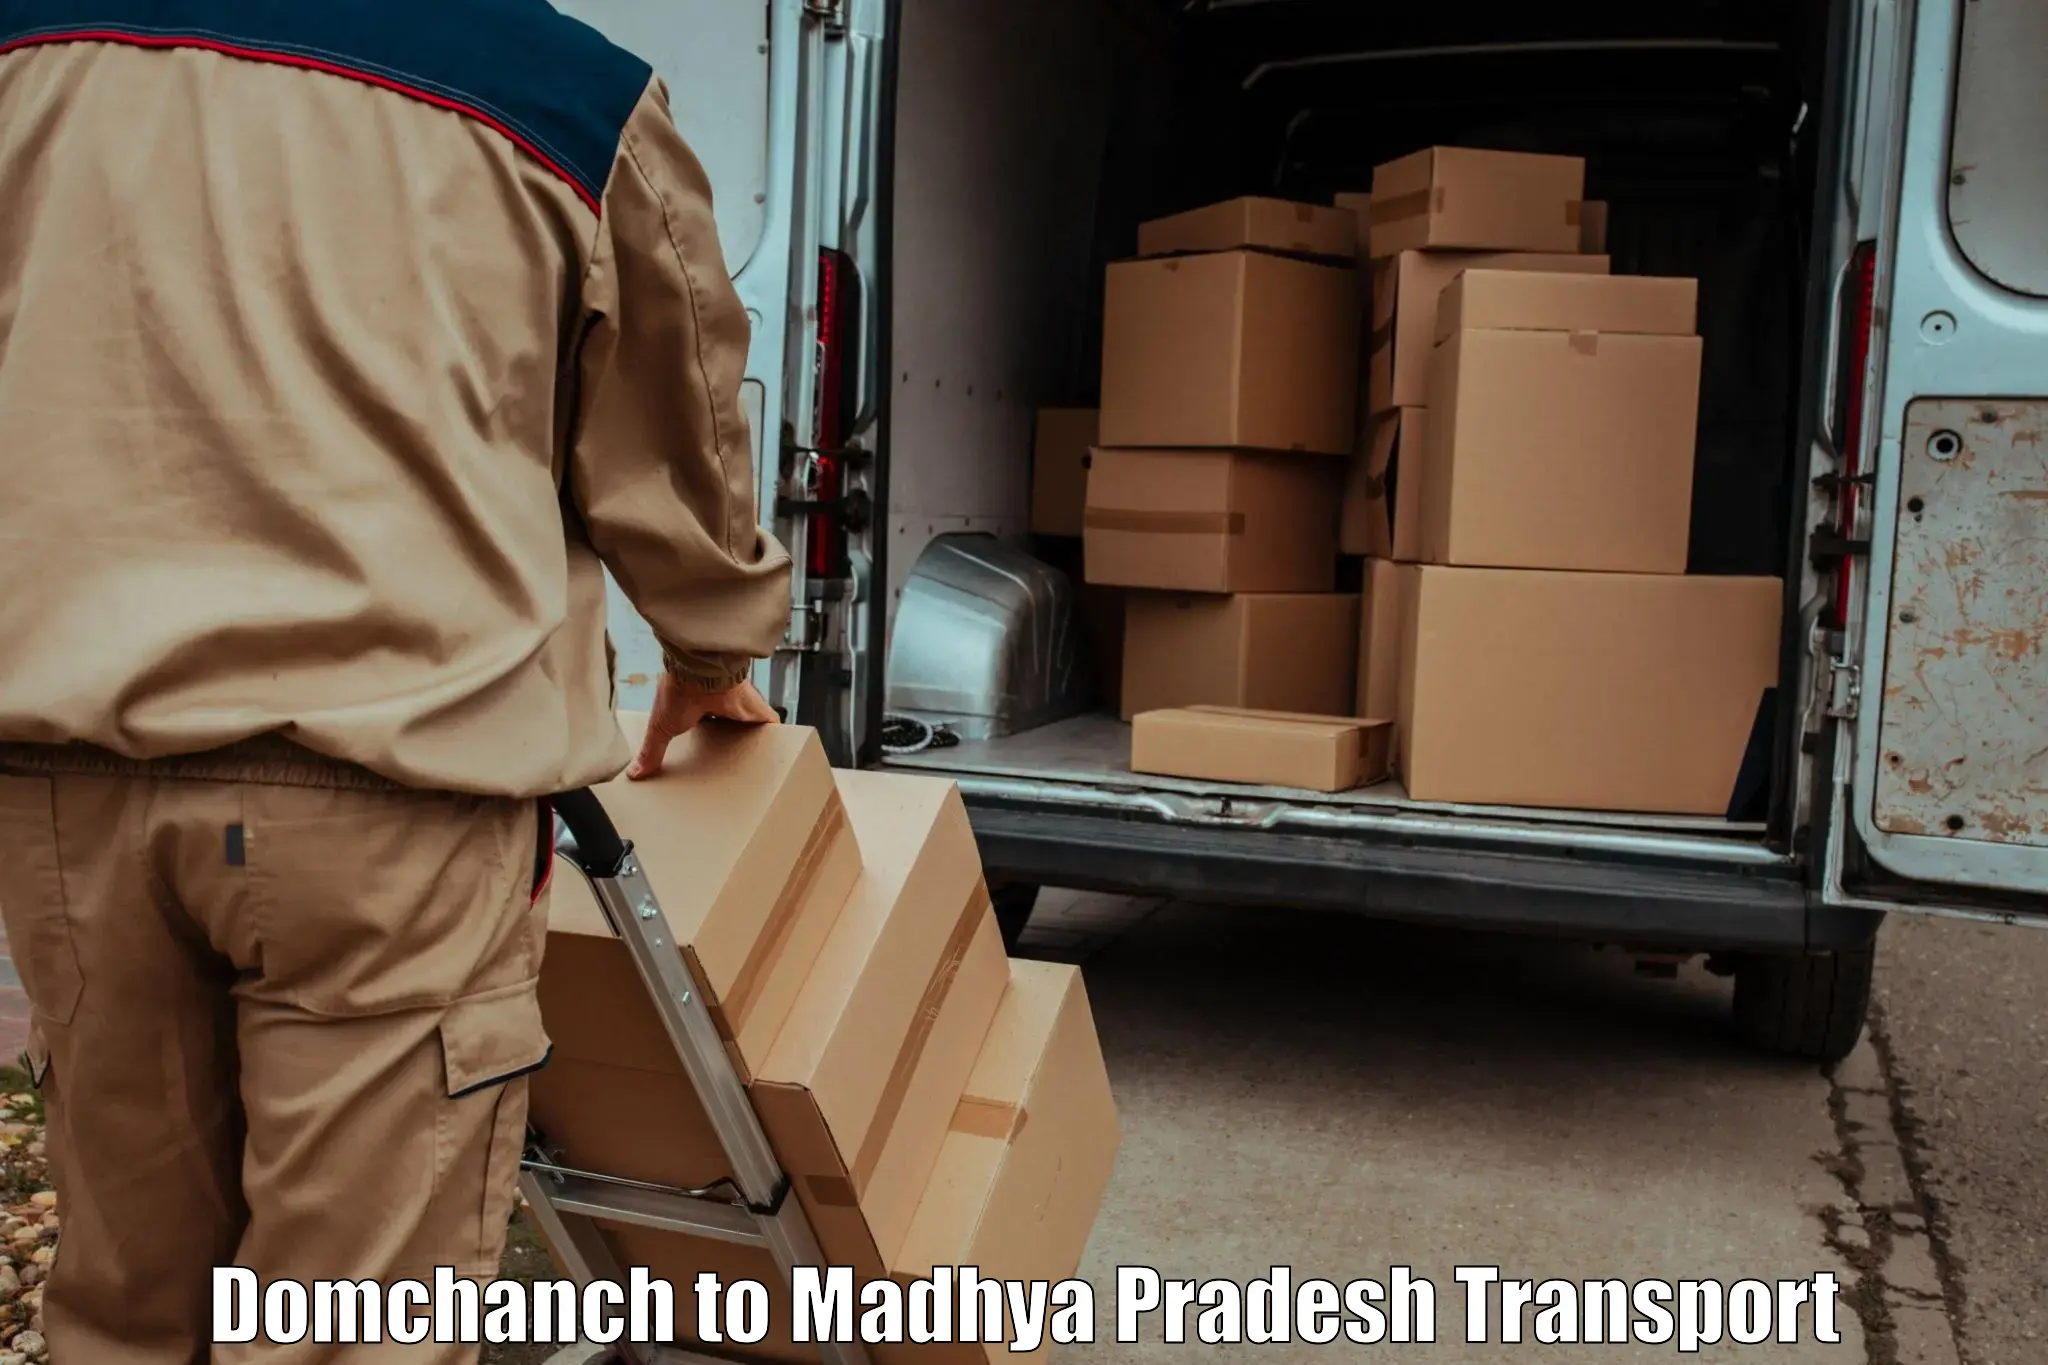 Domestic transport services Domchanch to Sausar